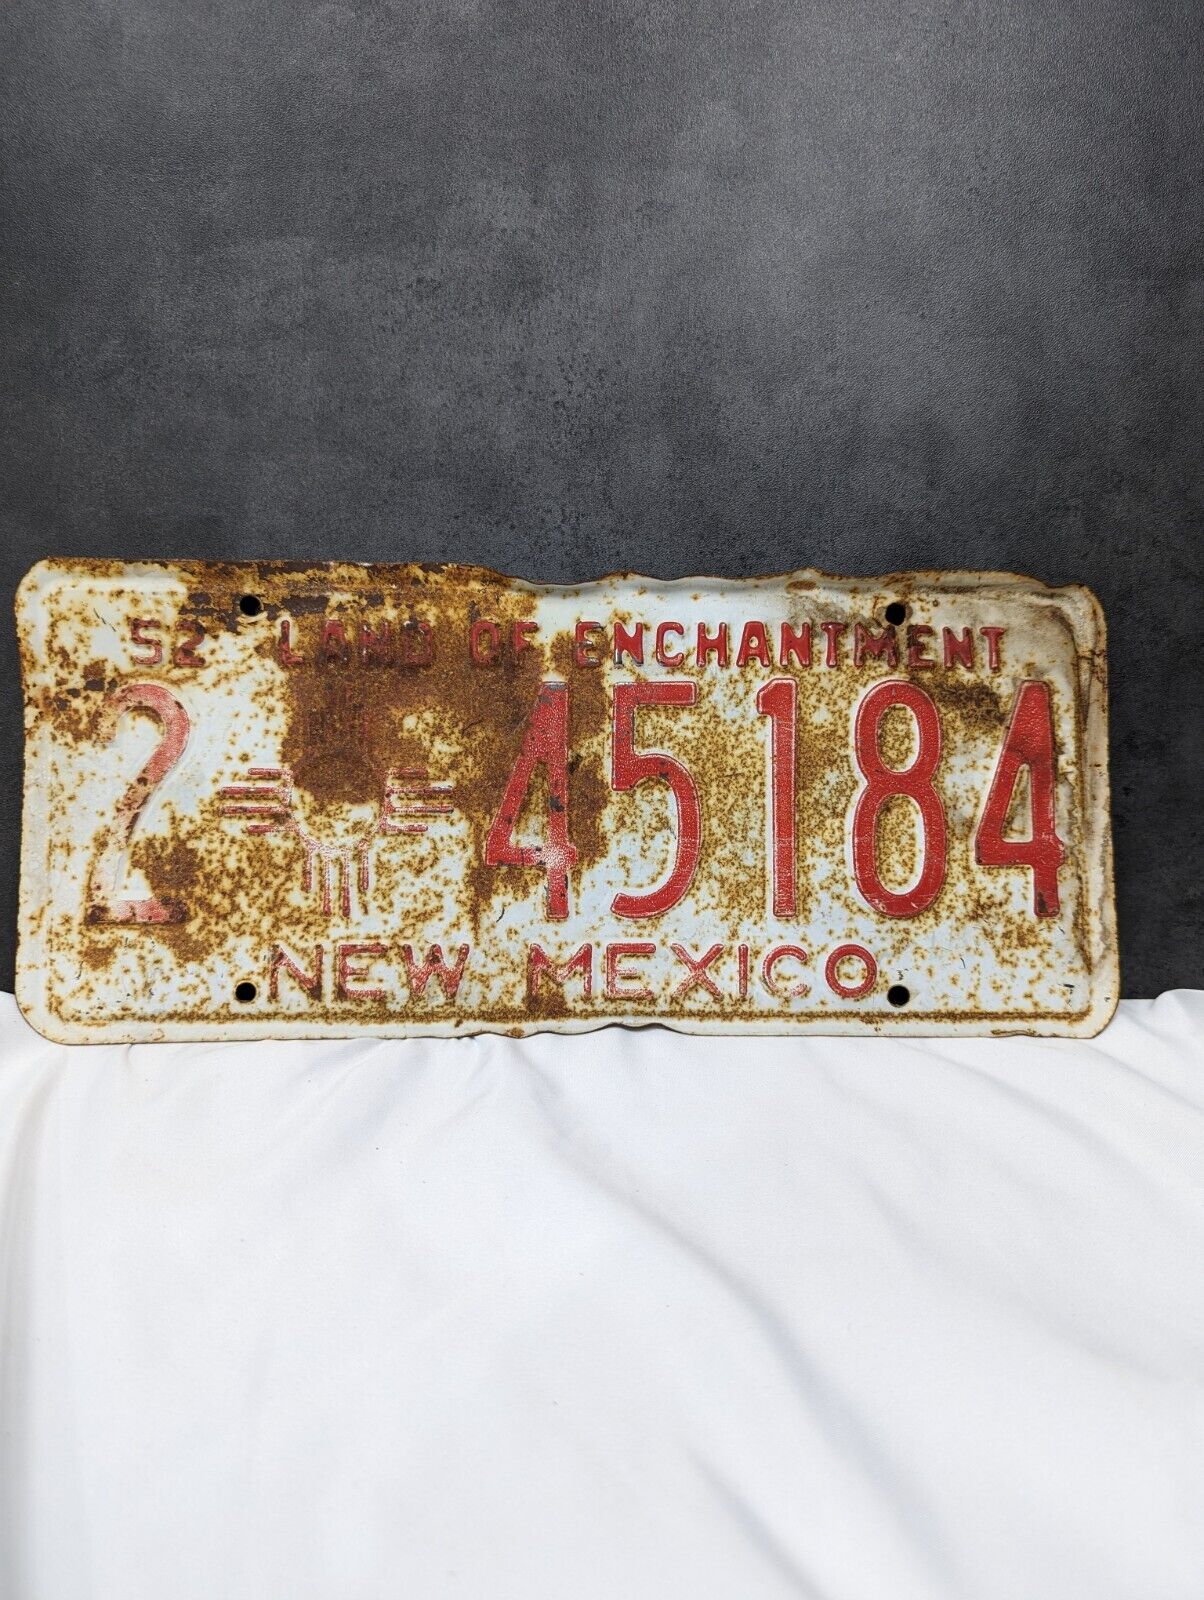 Vintage 1952 New Mexico Land of Enchantment License Plate 245184